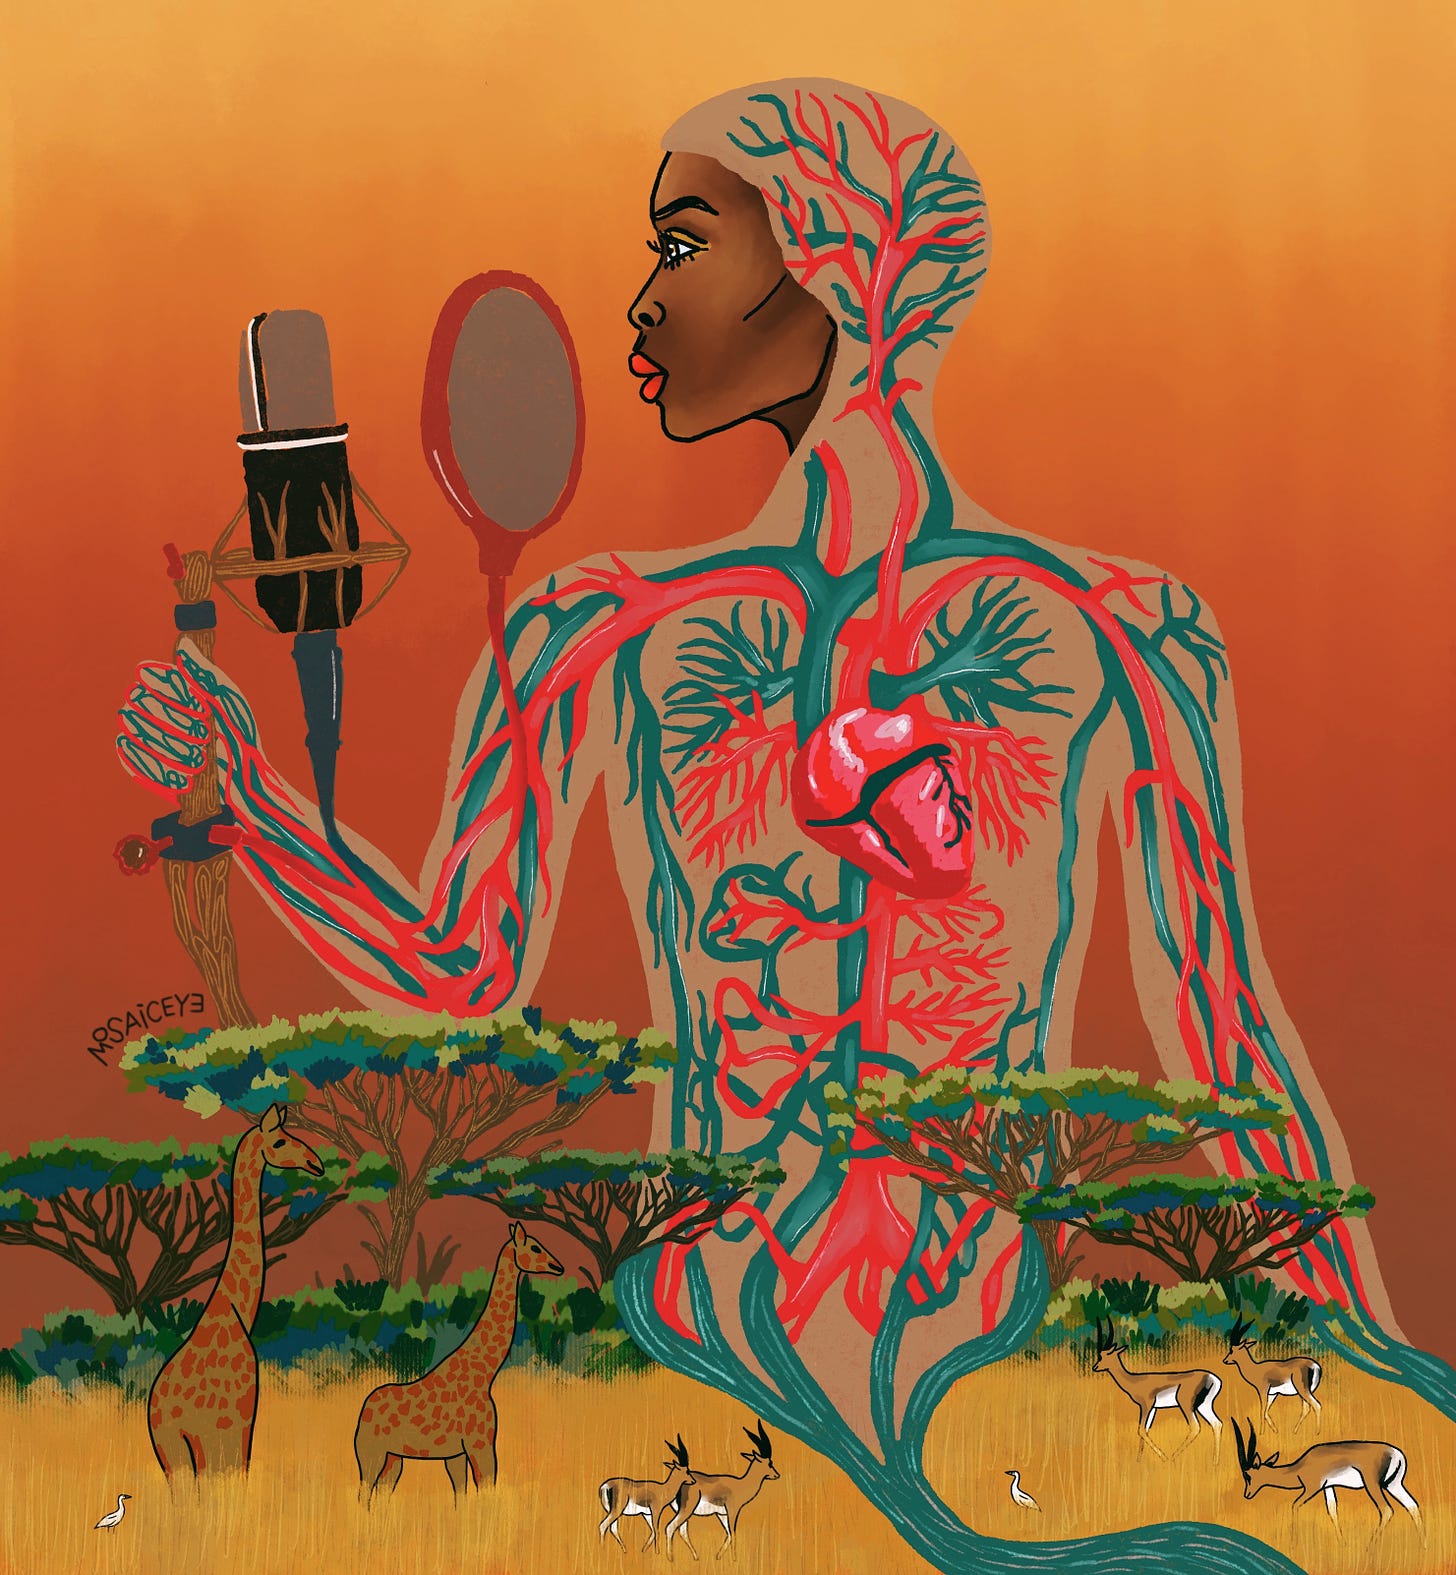 A colorful surrealist painting of a woman's body coming out of trees and tall grasses filled with giraffe and antelope, the person is holding a mirror and microphone up to their face, their body shows exposed heart and veins 